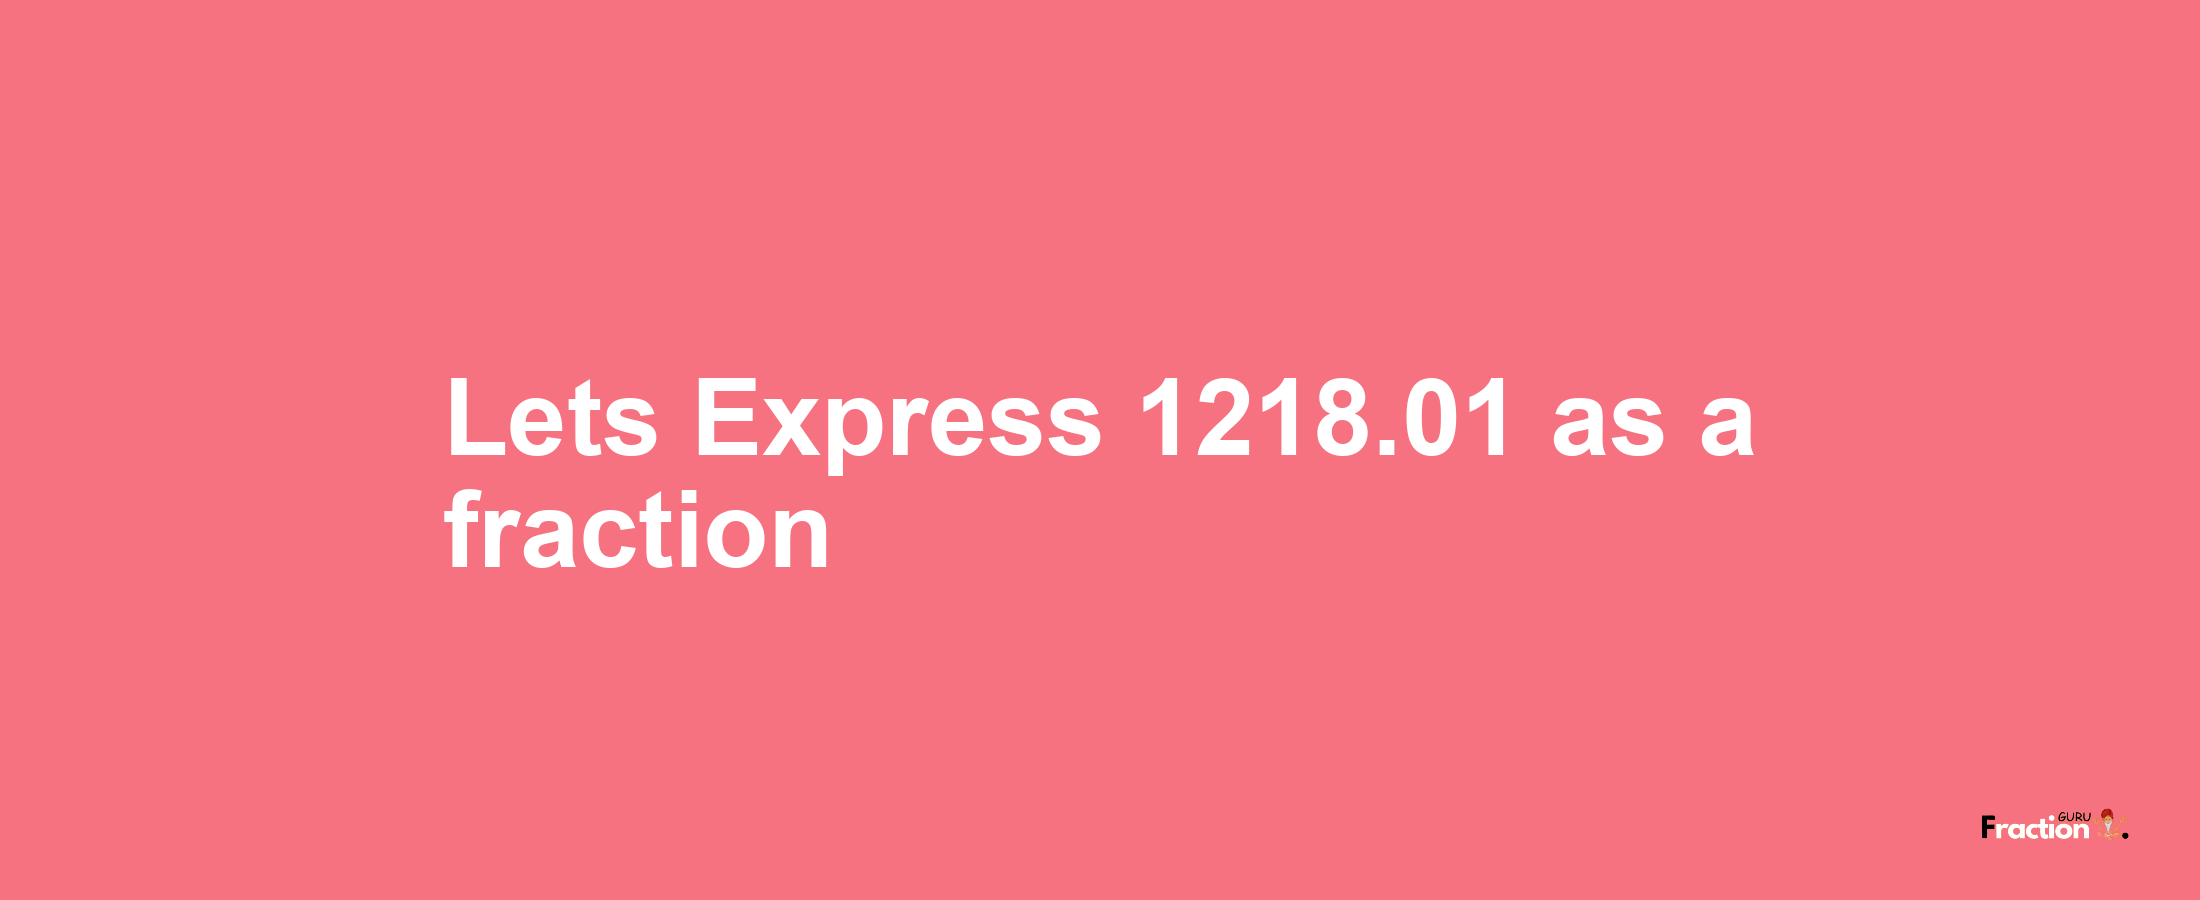 Lets Express 1218.01 as afraction